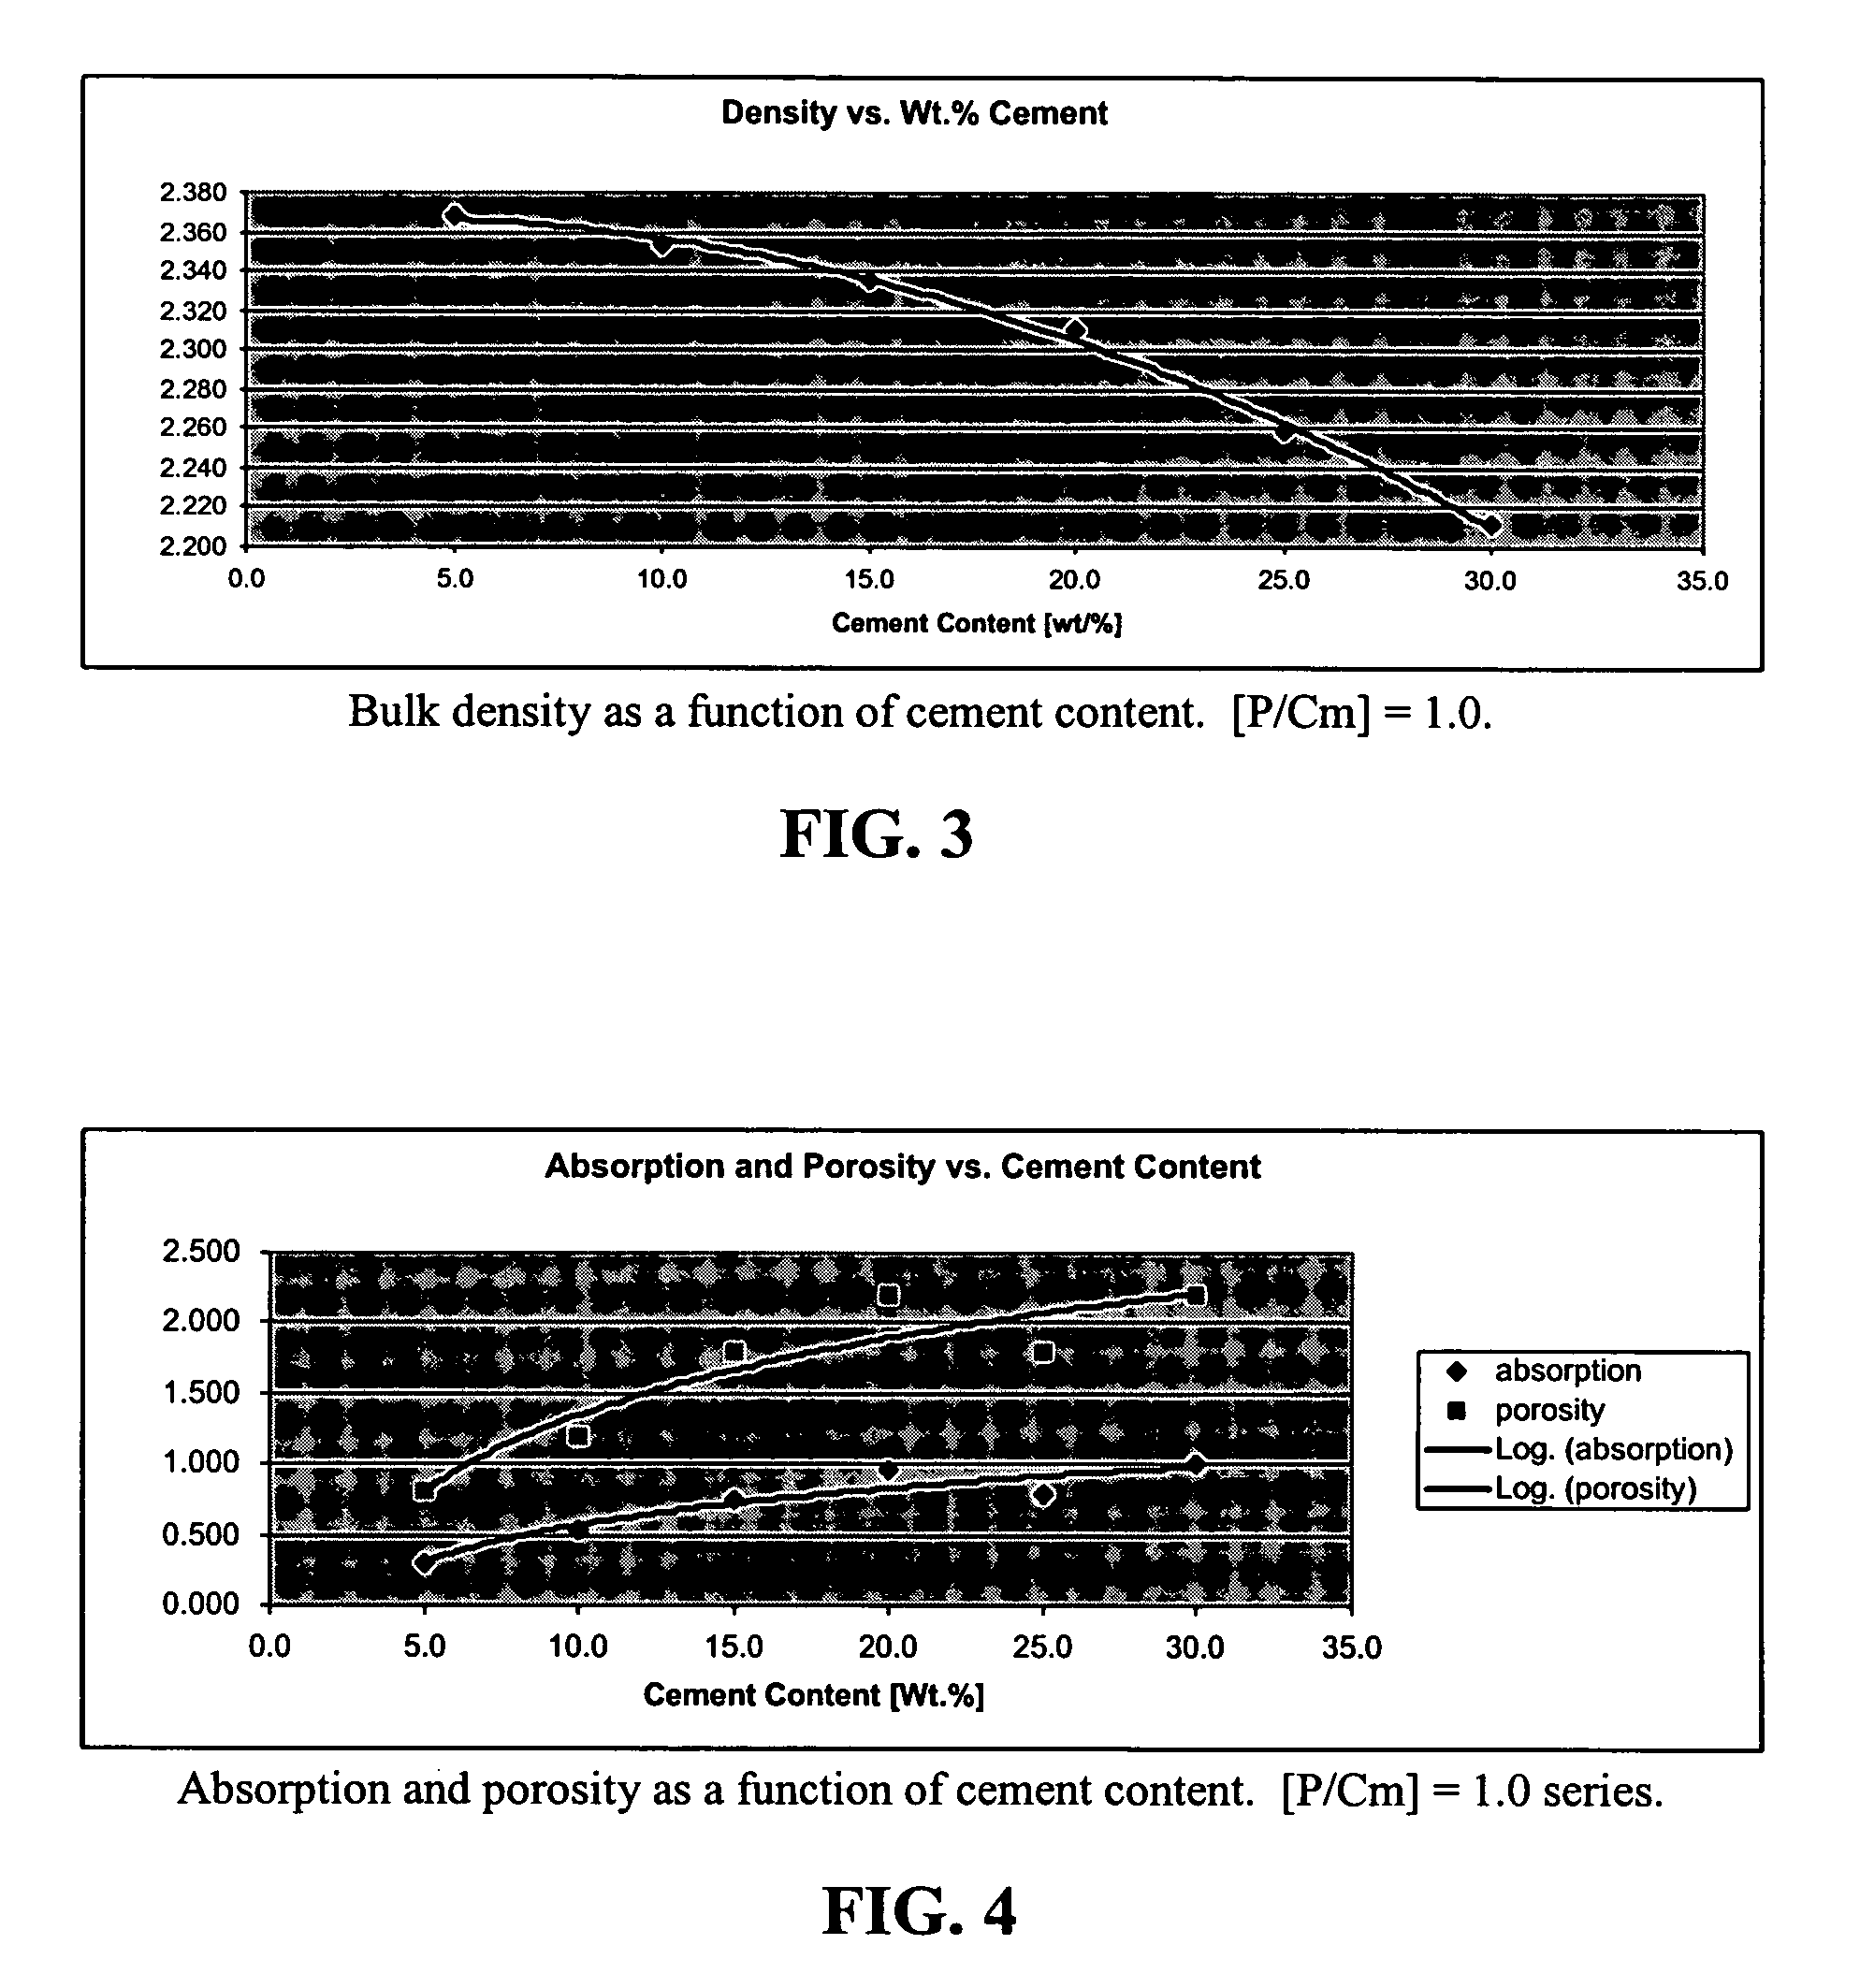 Cementitious composition incorporating high levels of glass aggregate for producing solid surfaces